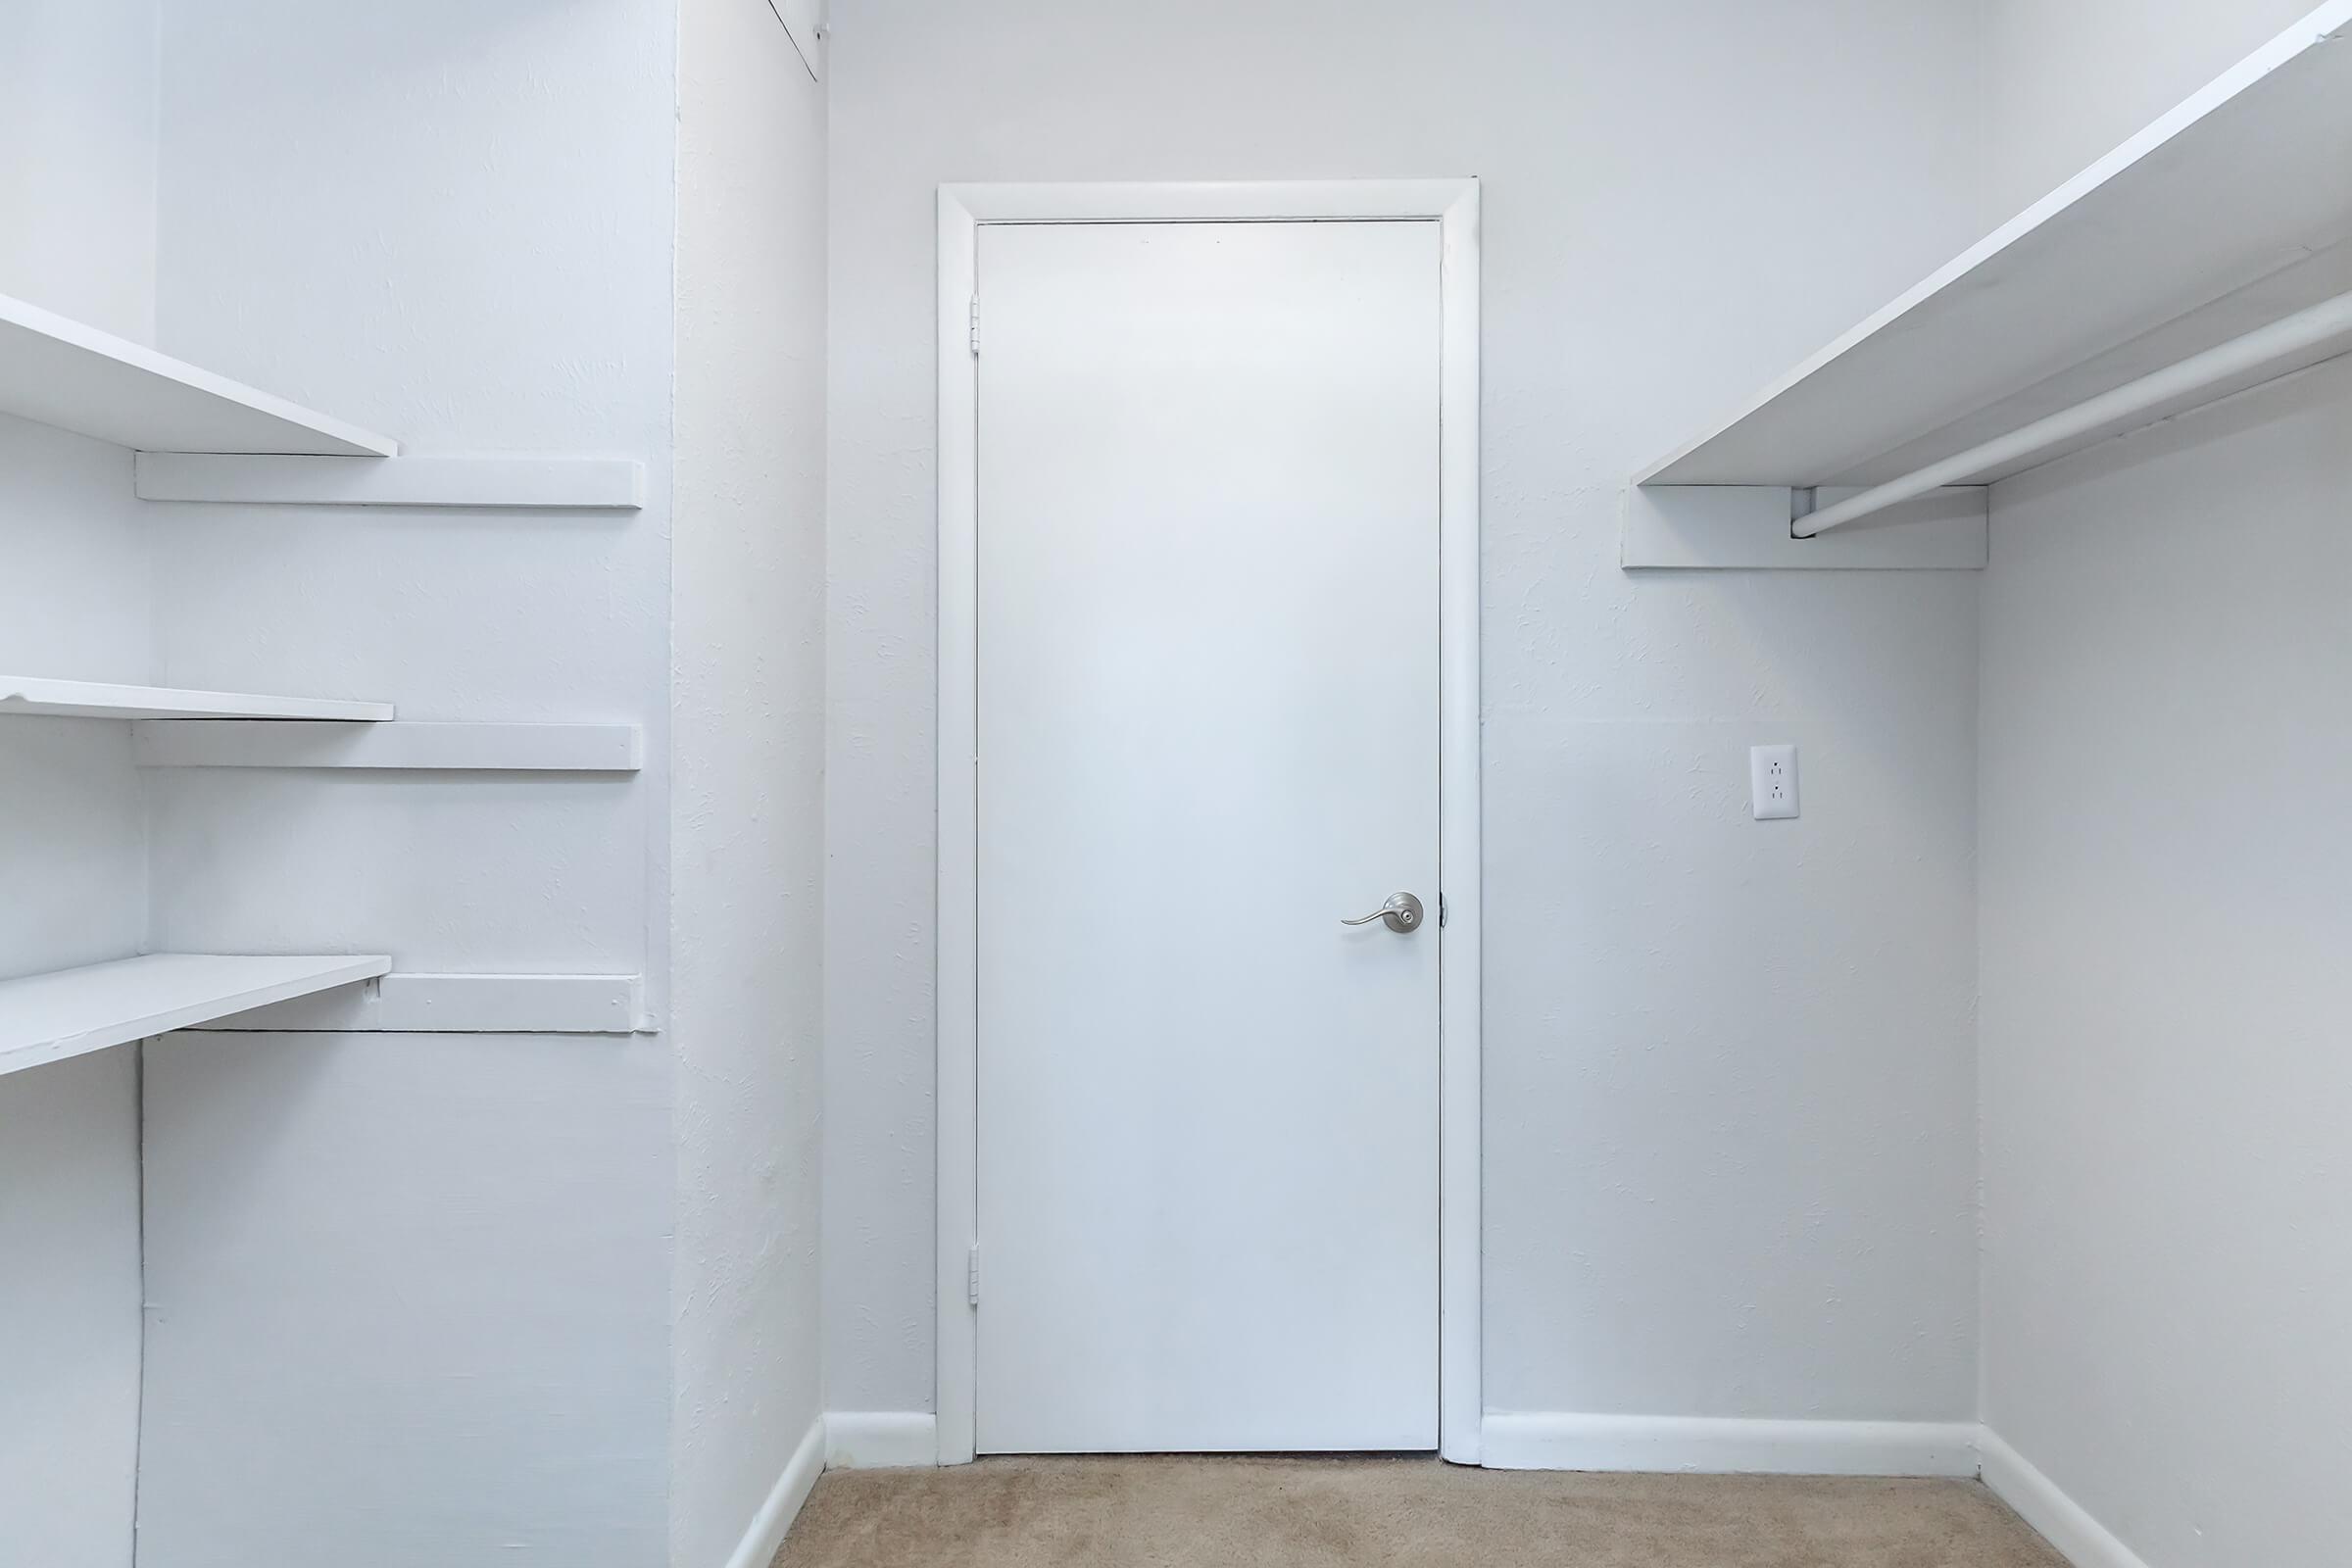 Walk-in Closet at Chase Cove Apartments in Nashville, TN